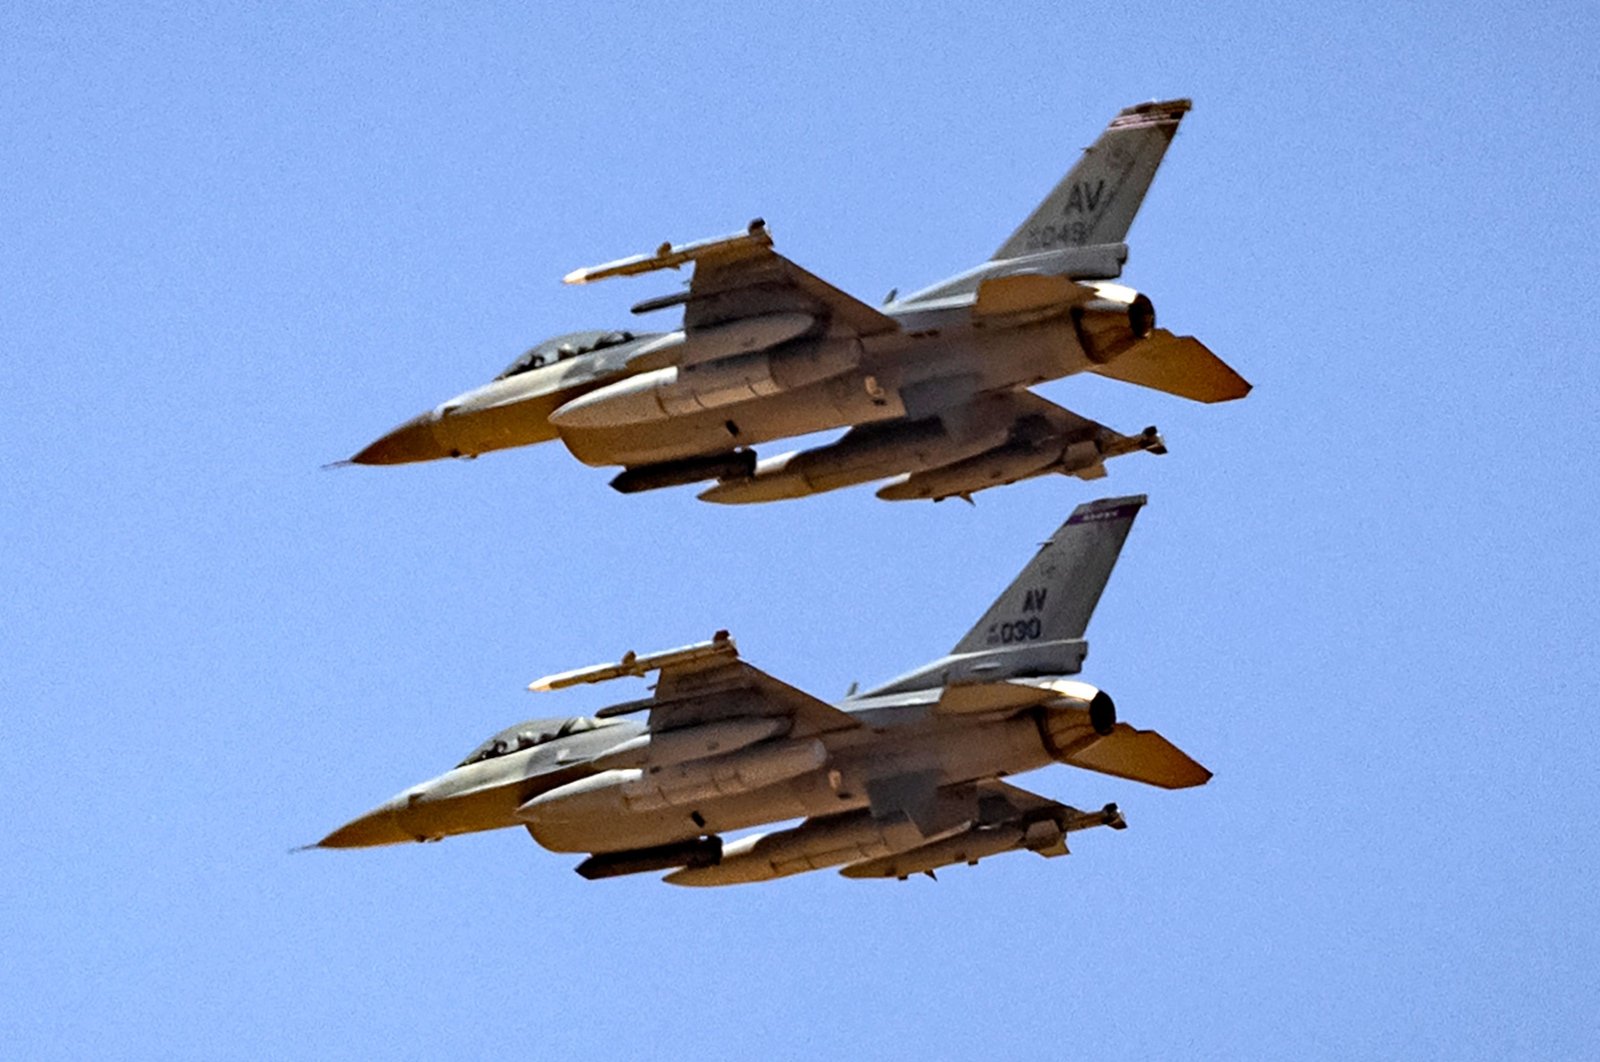 U.S. Air Force F-16 fighter jets prepare to land at an air base in Ben Guerir, about 58 kilometers (35 miles) north of Marrakesh, Morocco, during the &quot;African Lion&quot; military exercise, June 14, 2021. (AFP Photo)